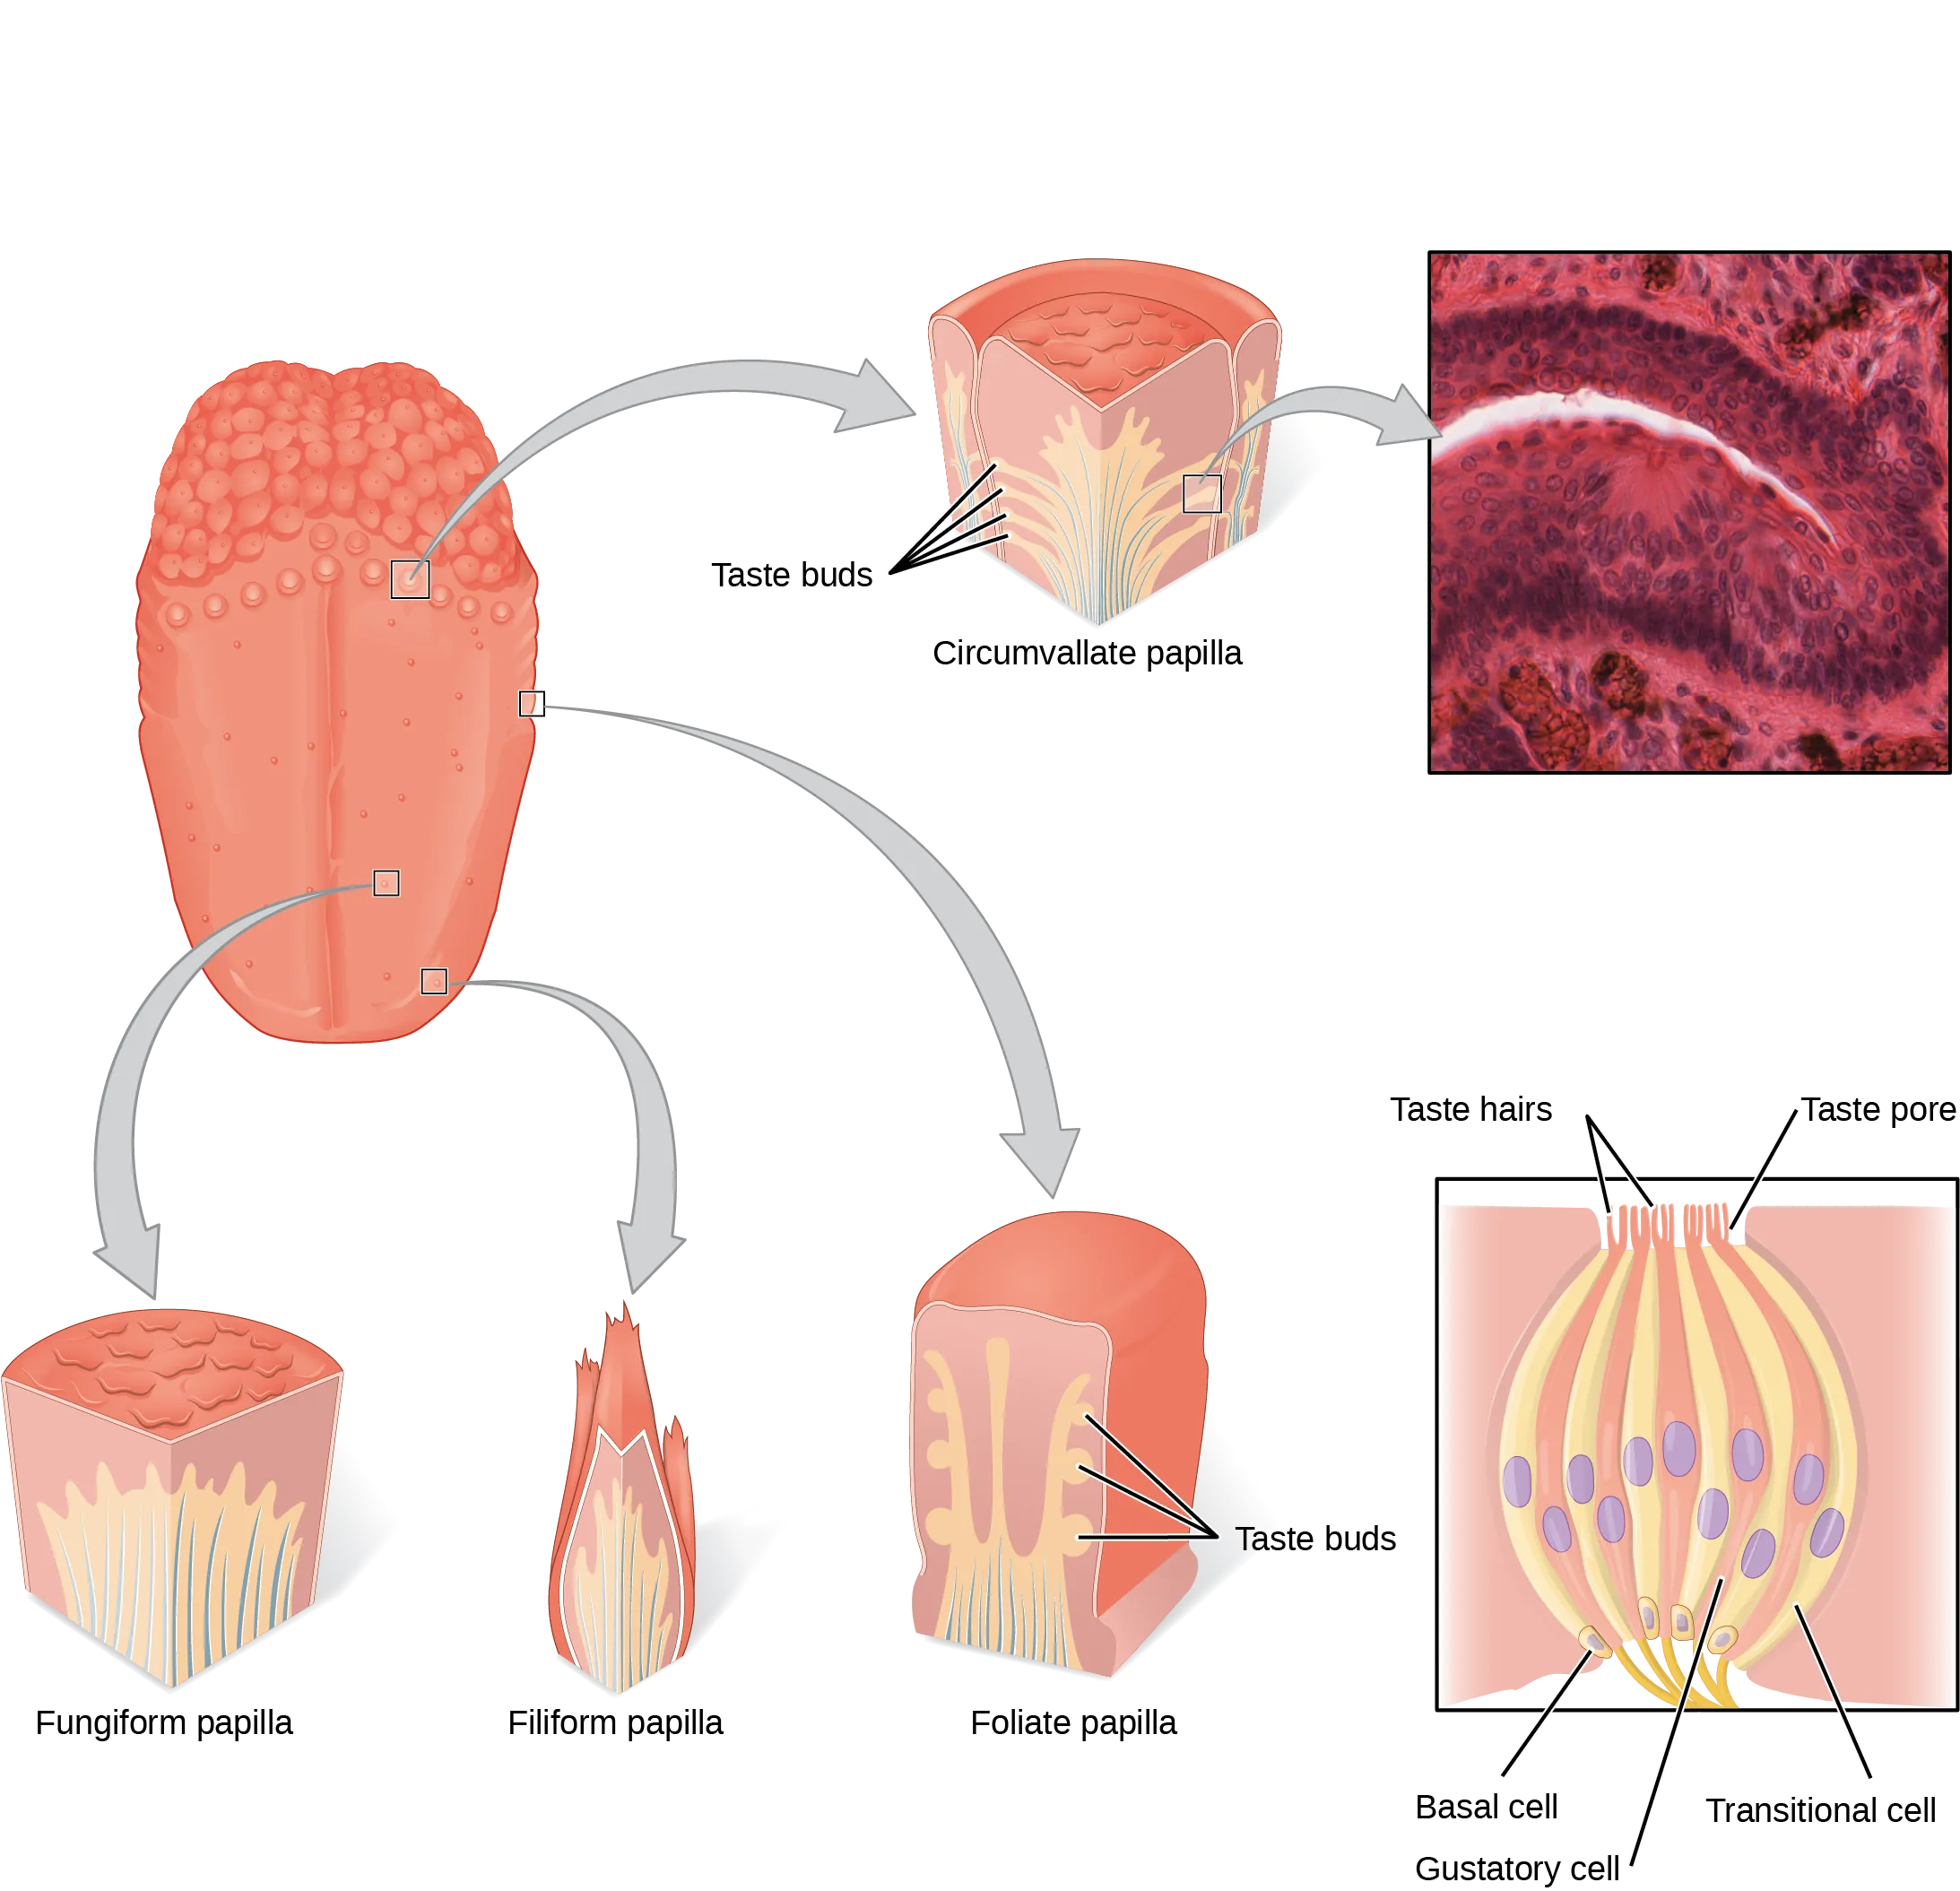 The left panel shows the image of a tongue with callouts that show magnified views of different parts of the tongue. The right panel shows a micrograph of the circumvallate papilla, and the bottom right panel shows the structure of a taste bud.  At the surface, the taste bud has hair like projects that are labeled taste hairs.  These extend up through a taste pore, and lead to a basal cell, gustatory cell, and transitional cell.